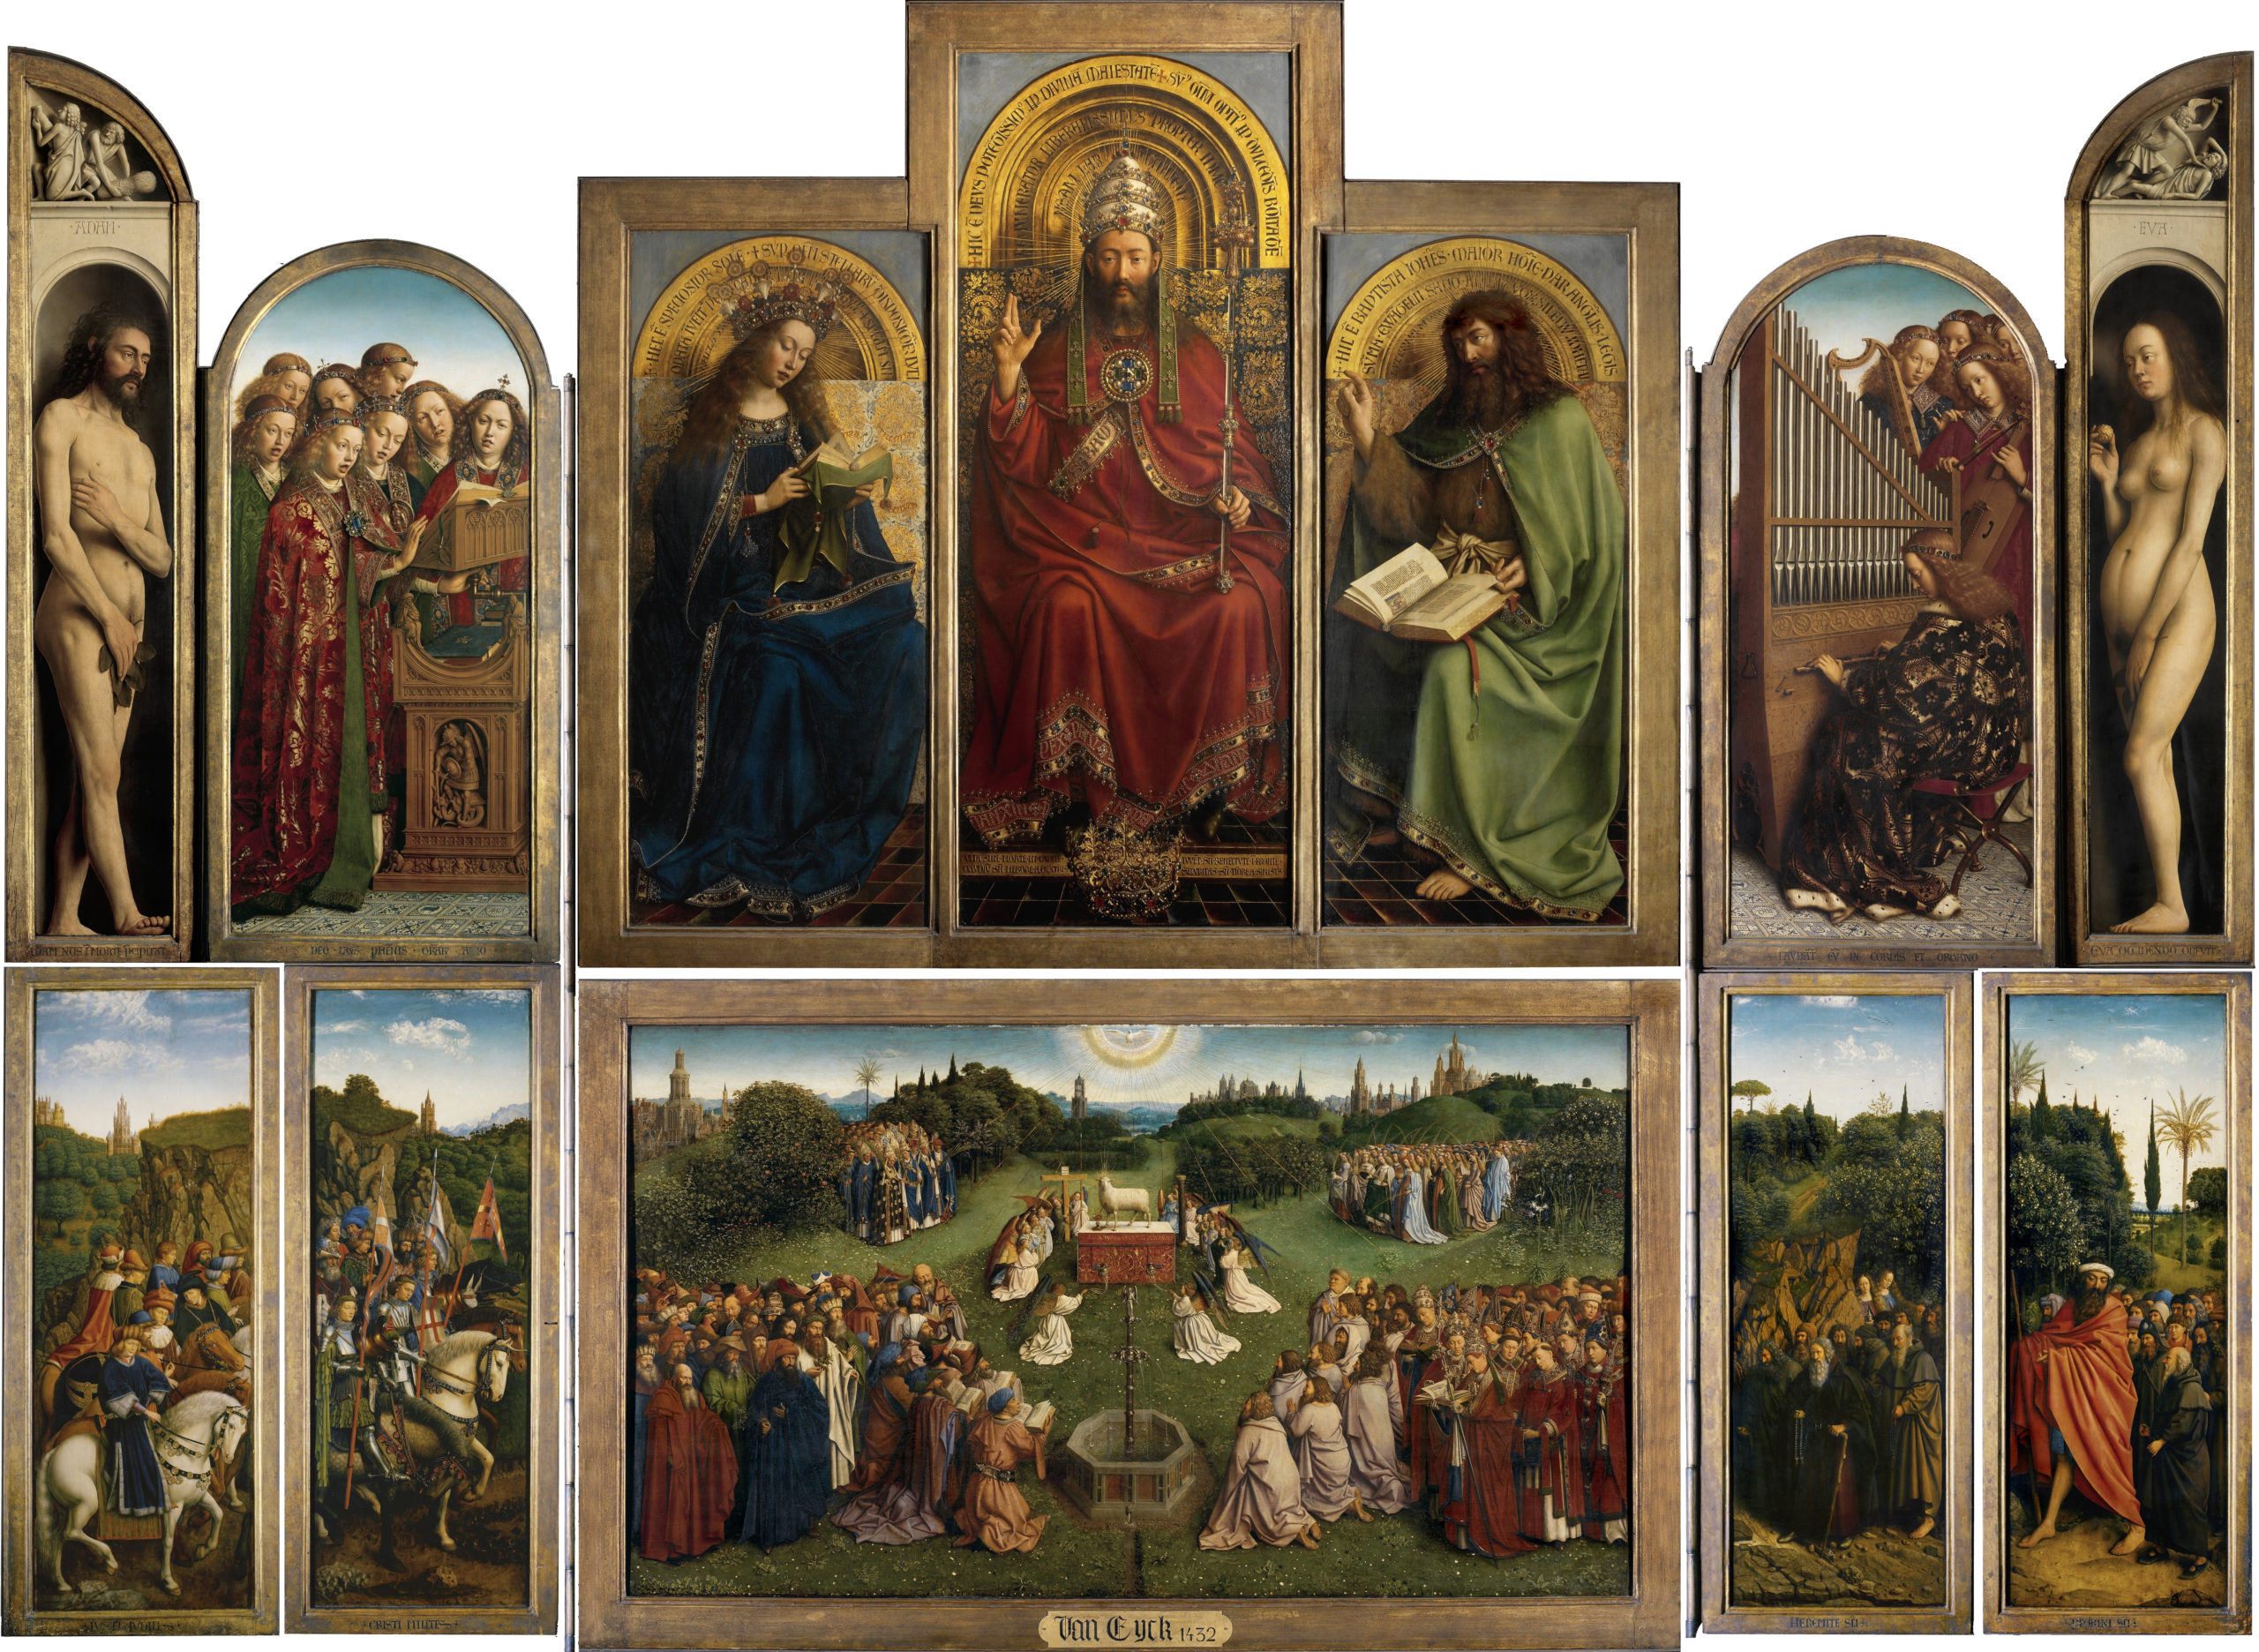 Jan and Hubert van Eyck, Ghent Altarpiece (also known as The Adoration of the Mystic Lamb), 1432, tempera and oil on panel, 11-5/8 x 15-1/8 inches (open) (Cathedral of Saint Bavo, Ghent, Belgium; photo: Zen3500, CC0)